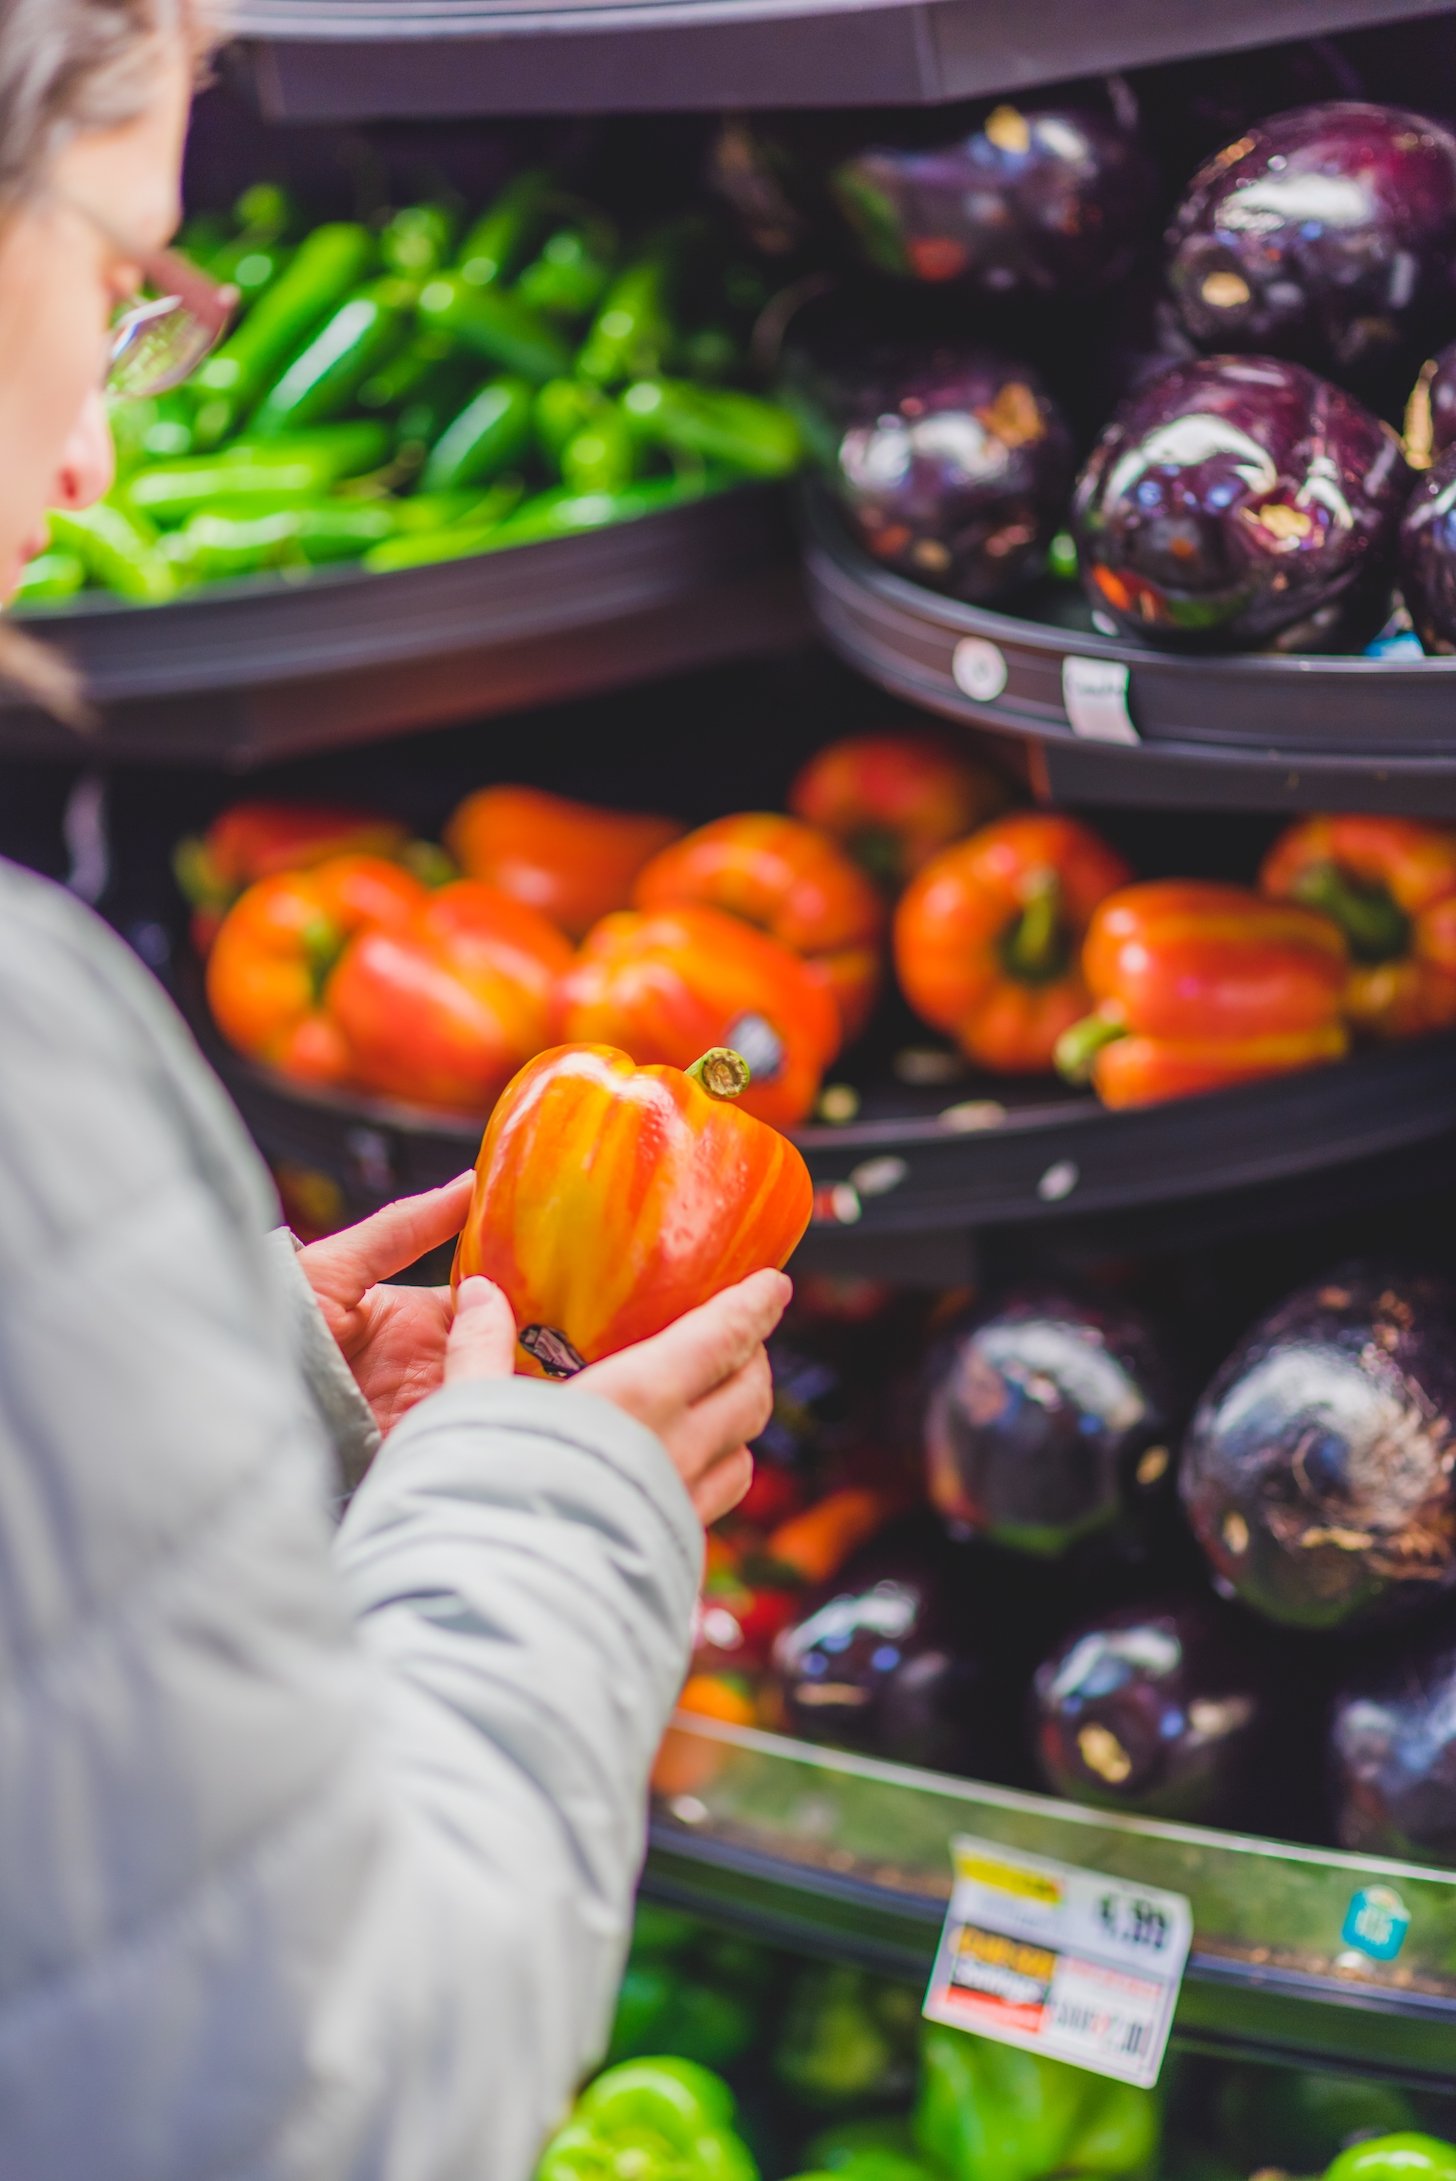 A person holding a pepper, while staring at it, in a grocery market.